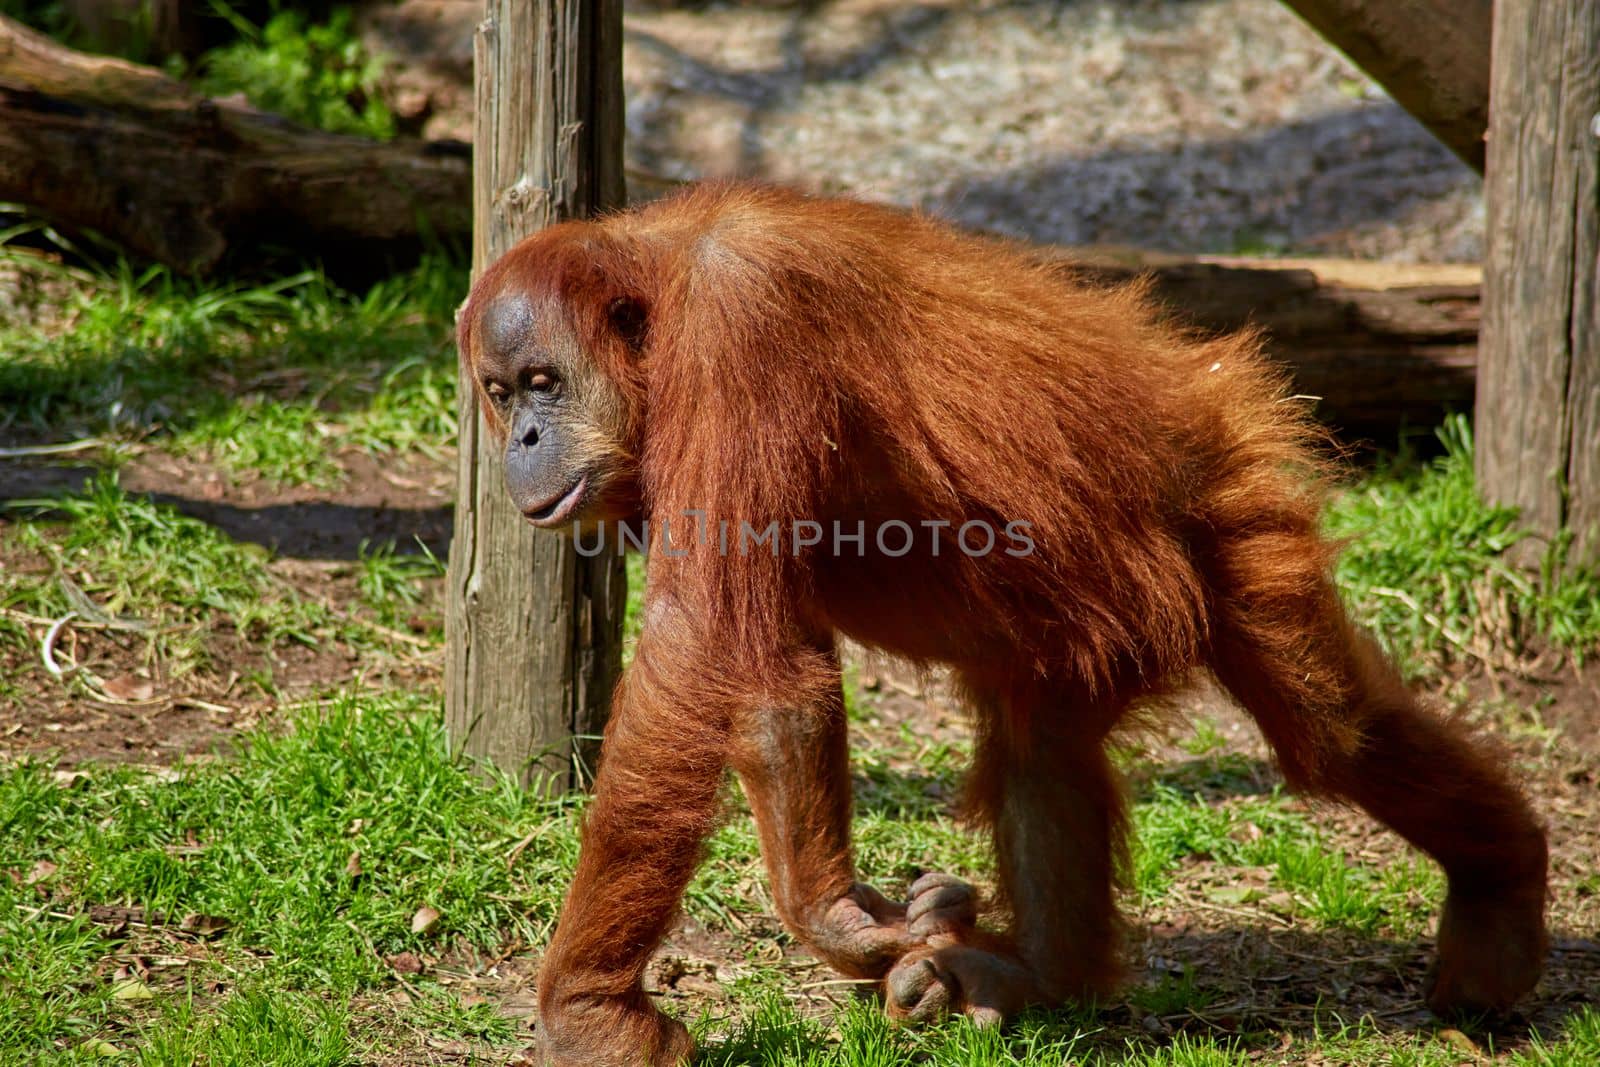 bored pensive orangutan in the open-air zoo by Try_my_best